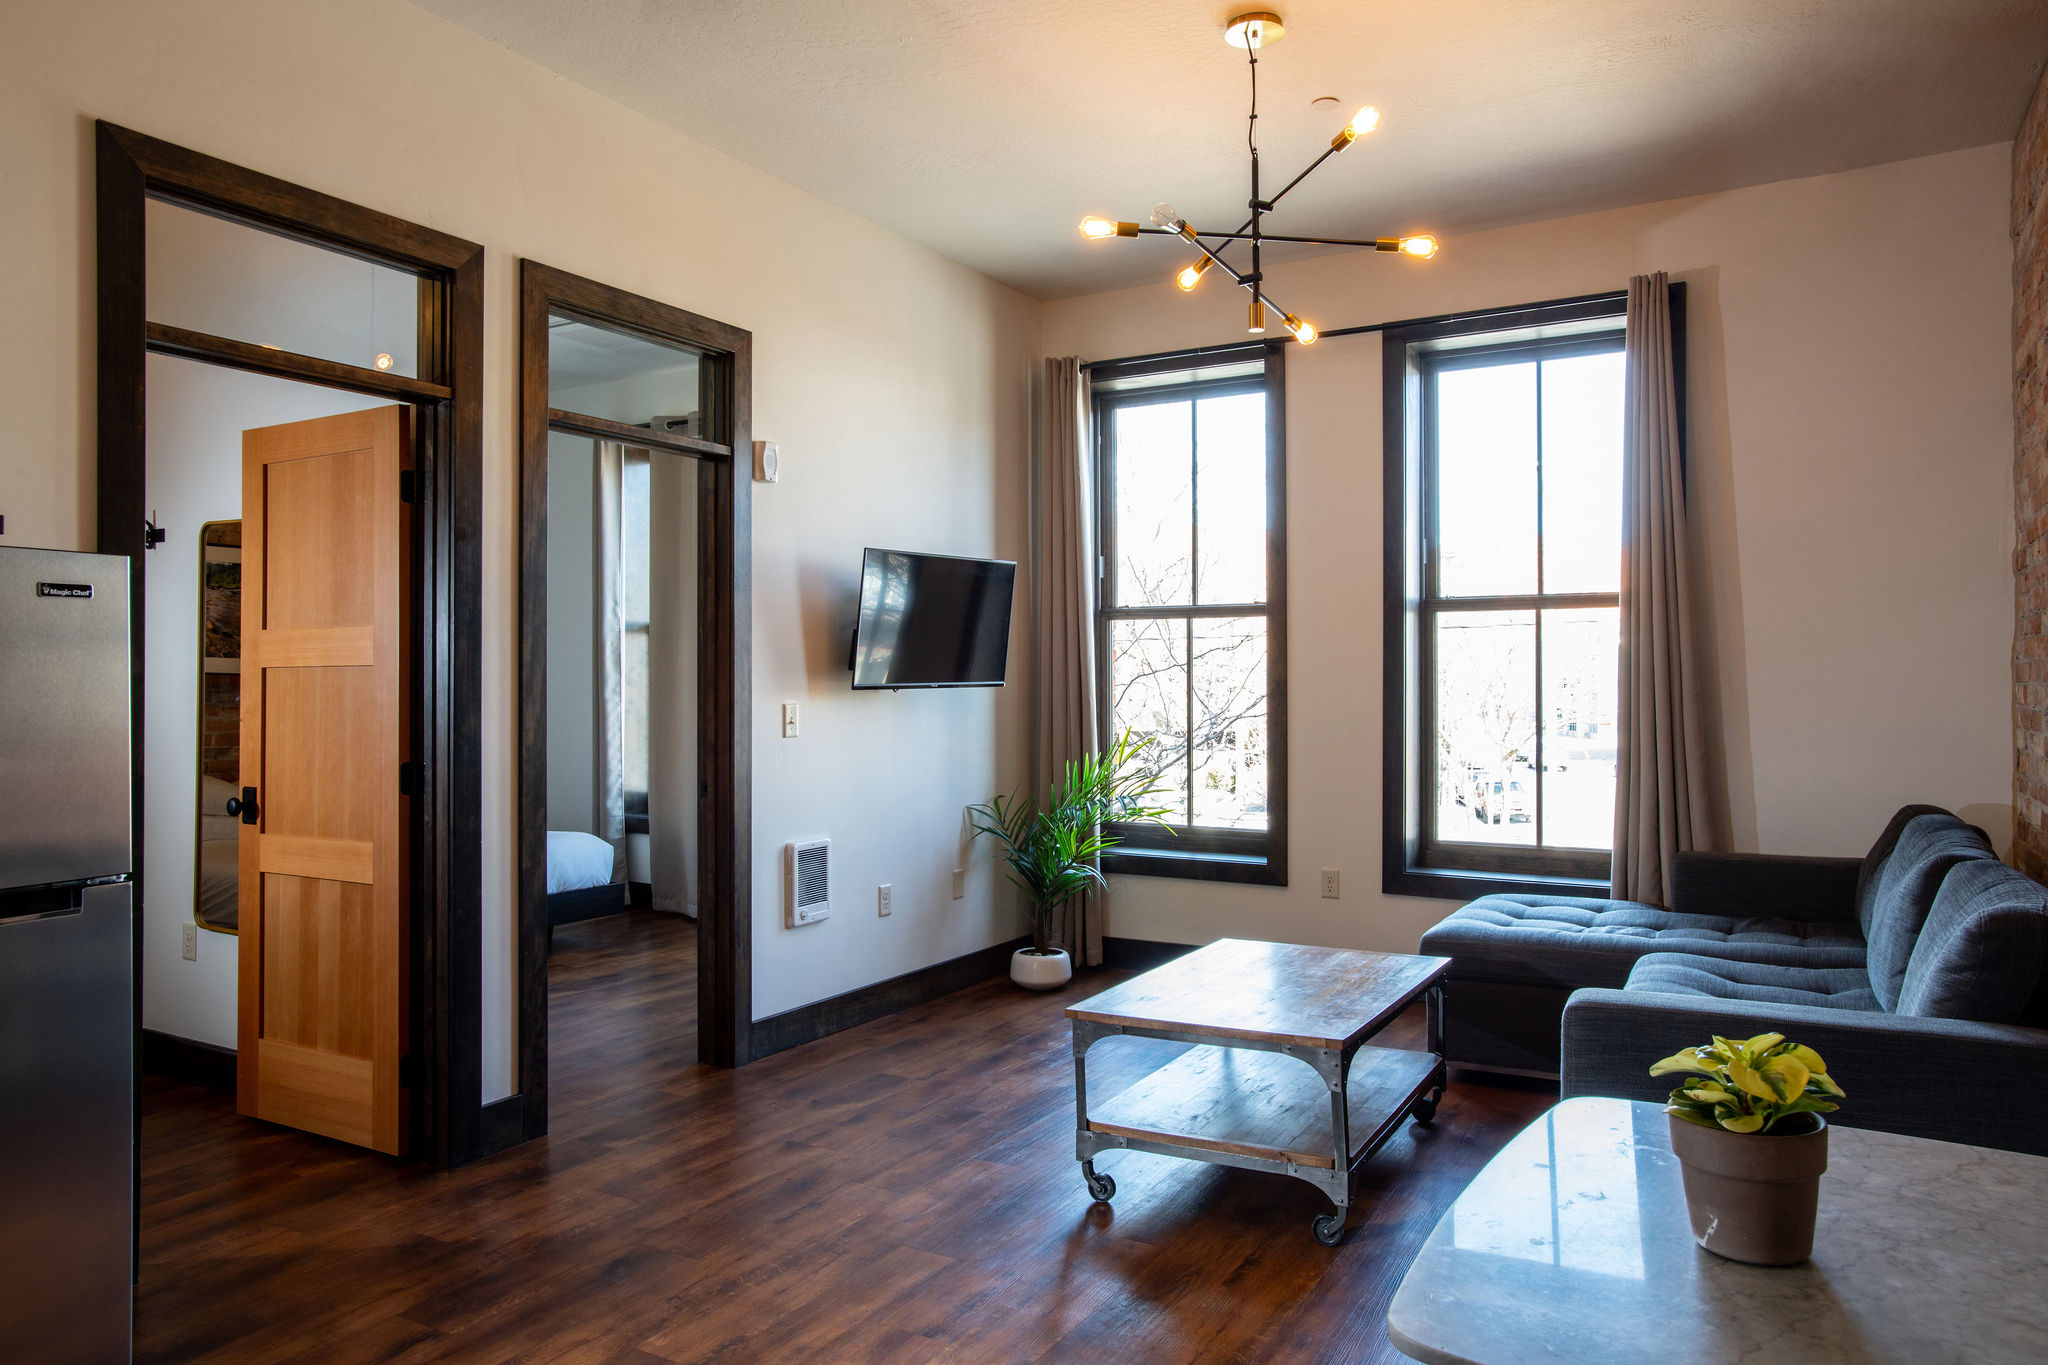 Places To Stay In Downtown Missoula